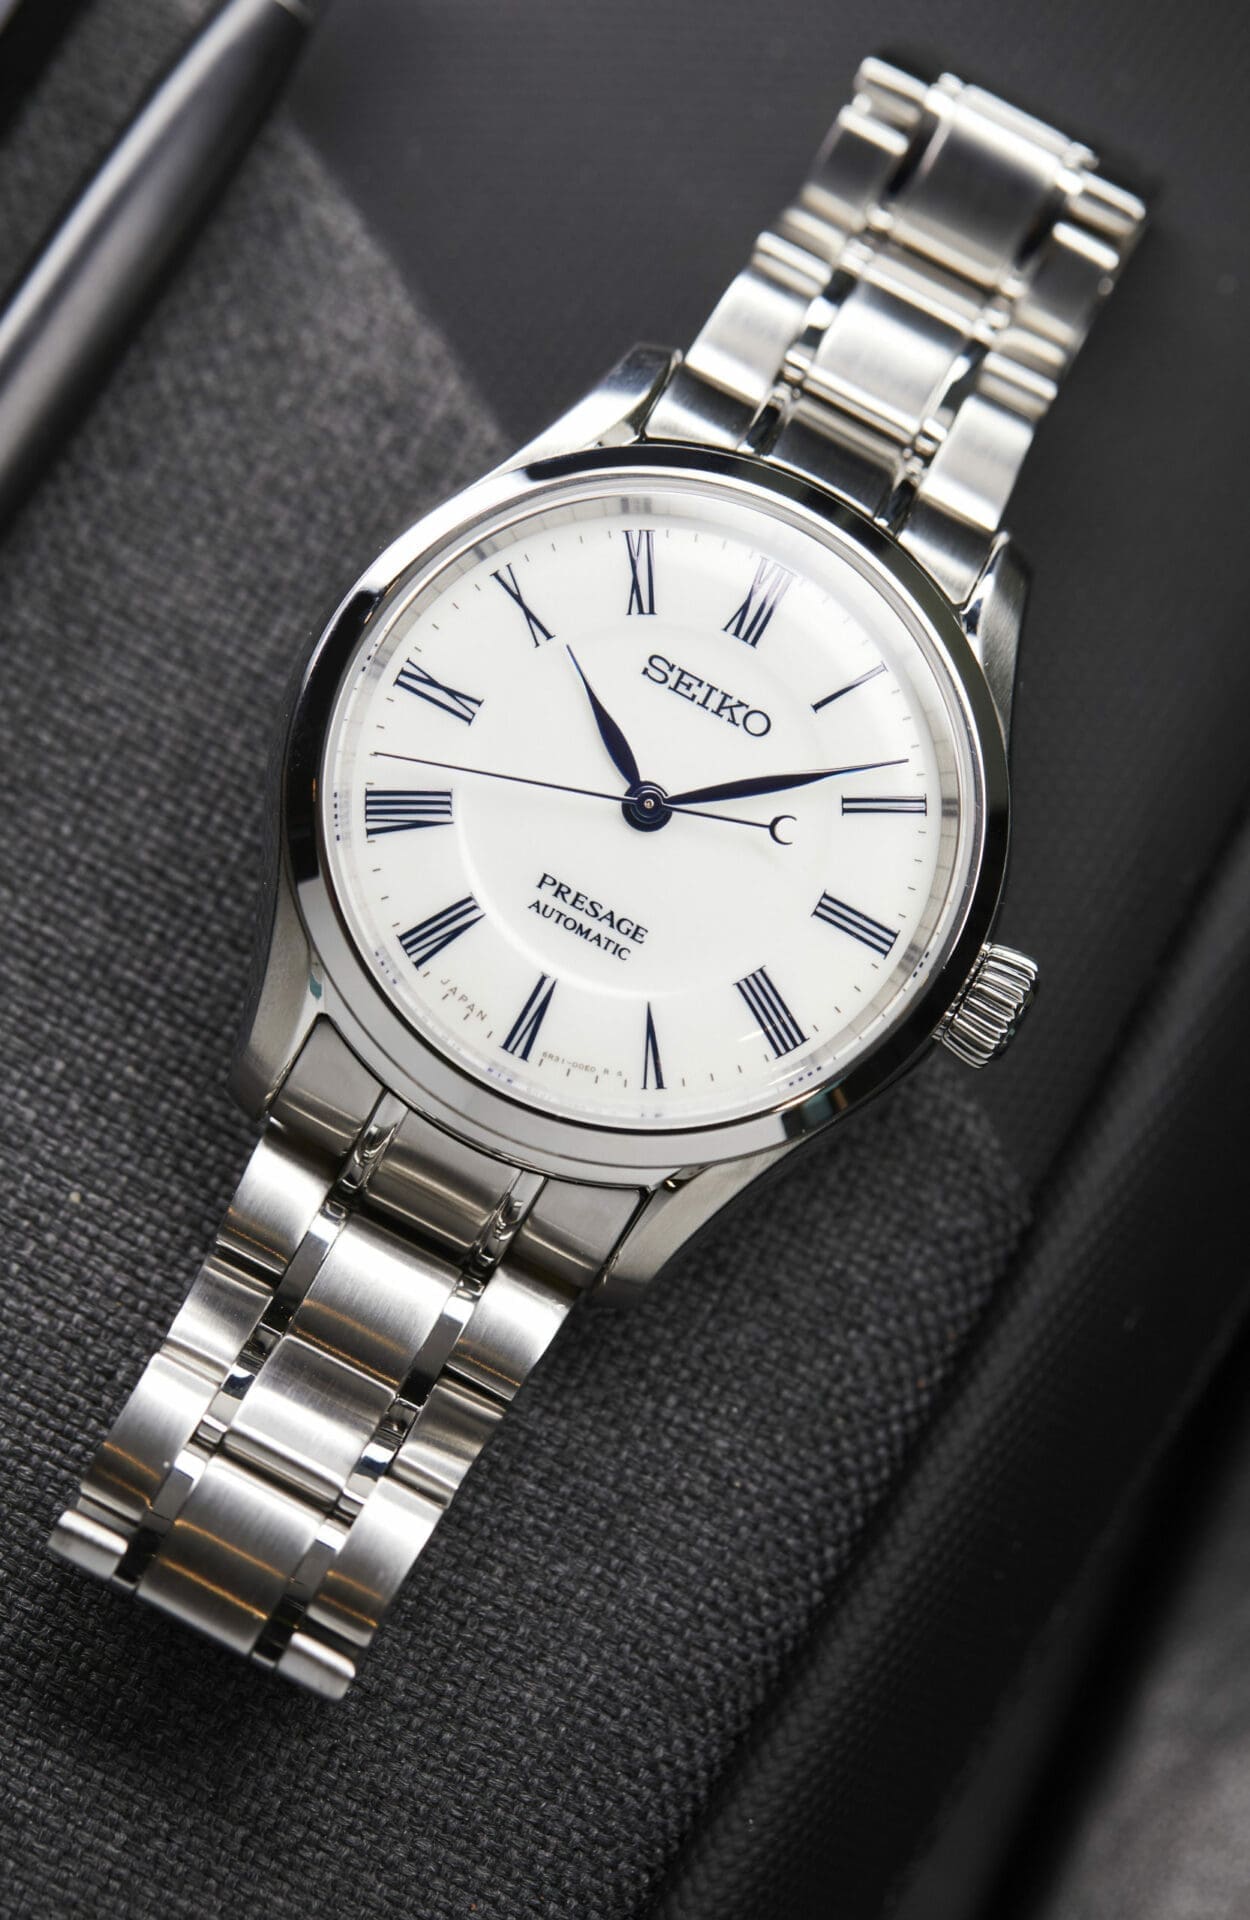 The Seiko Presage SPB293 is the essence of Japanese porcelain mastery